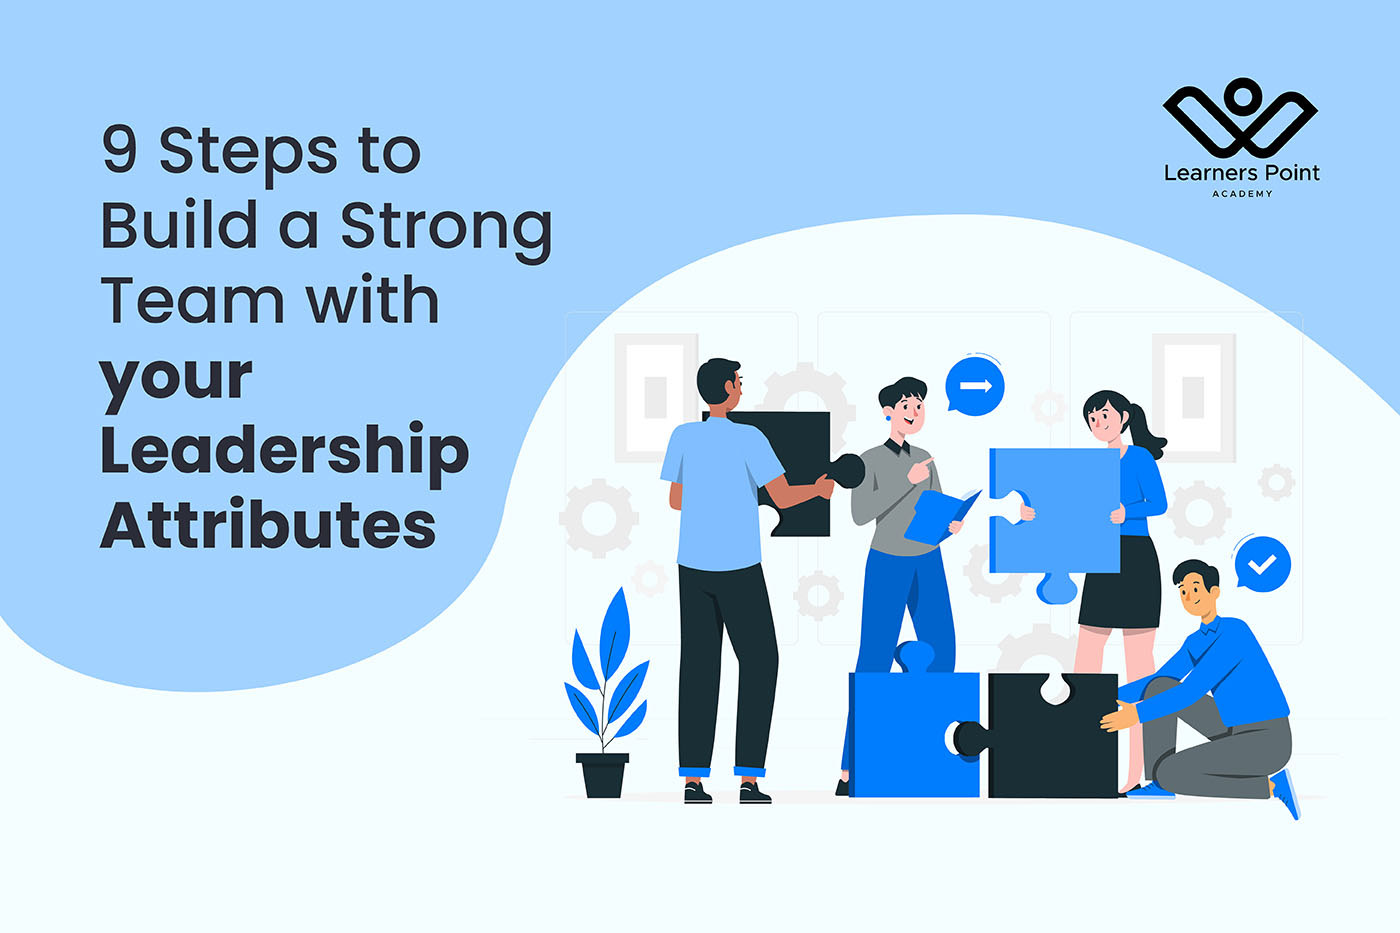 9 Steps to Build a Strong Team with your Leadership Attributes